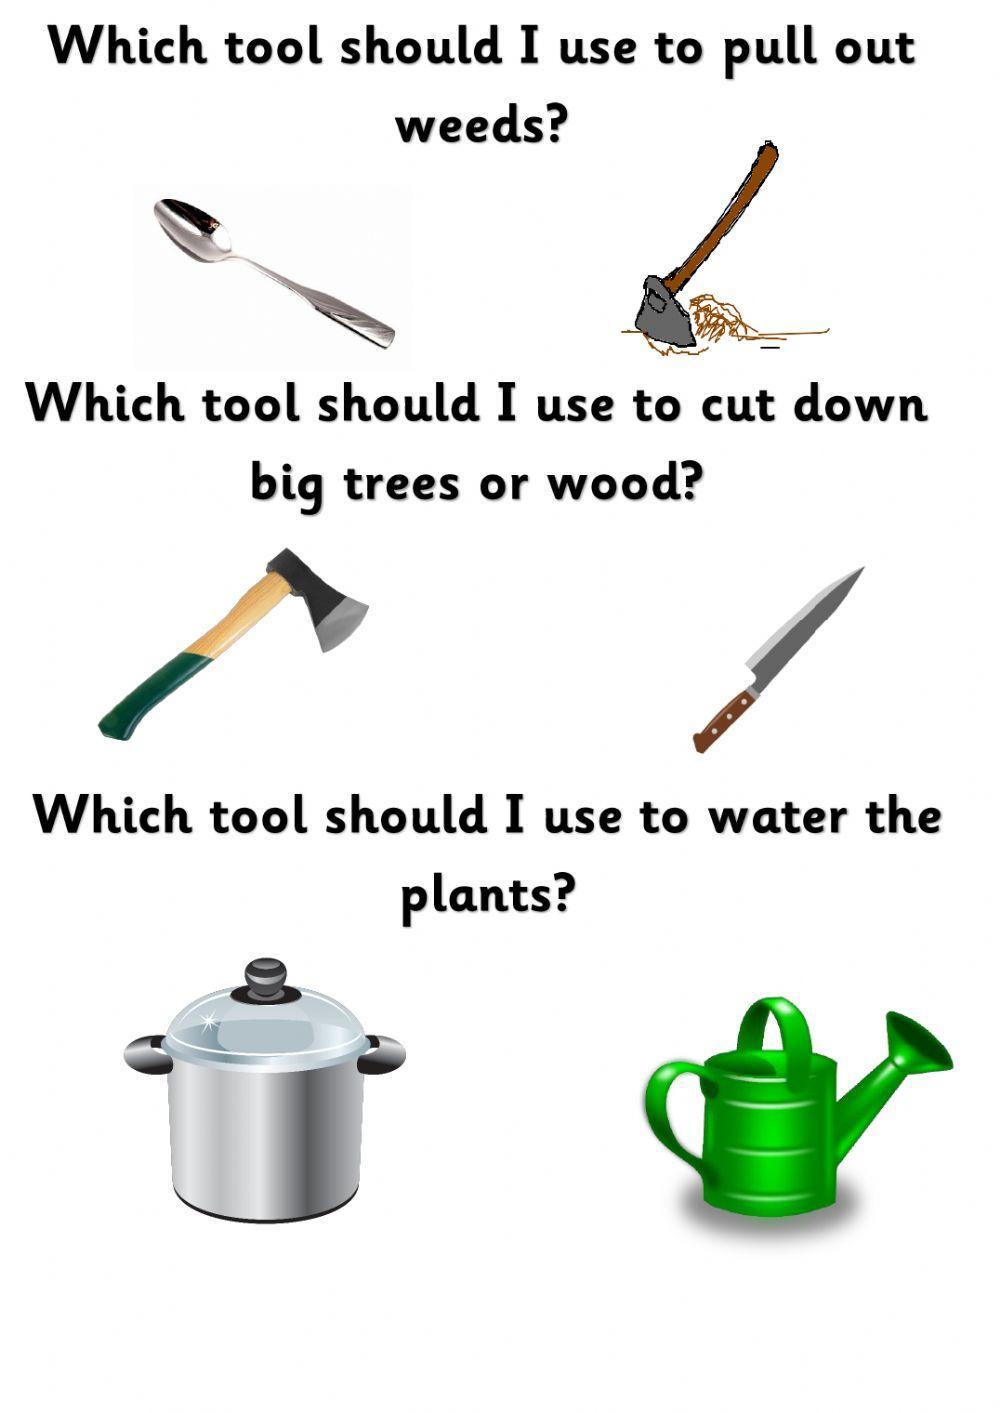 Tools in agriculture